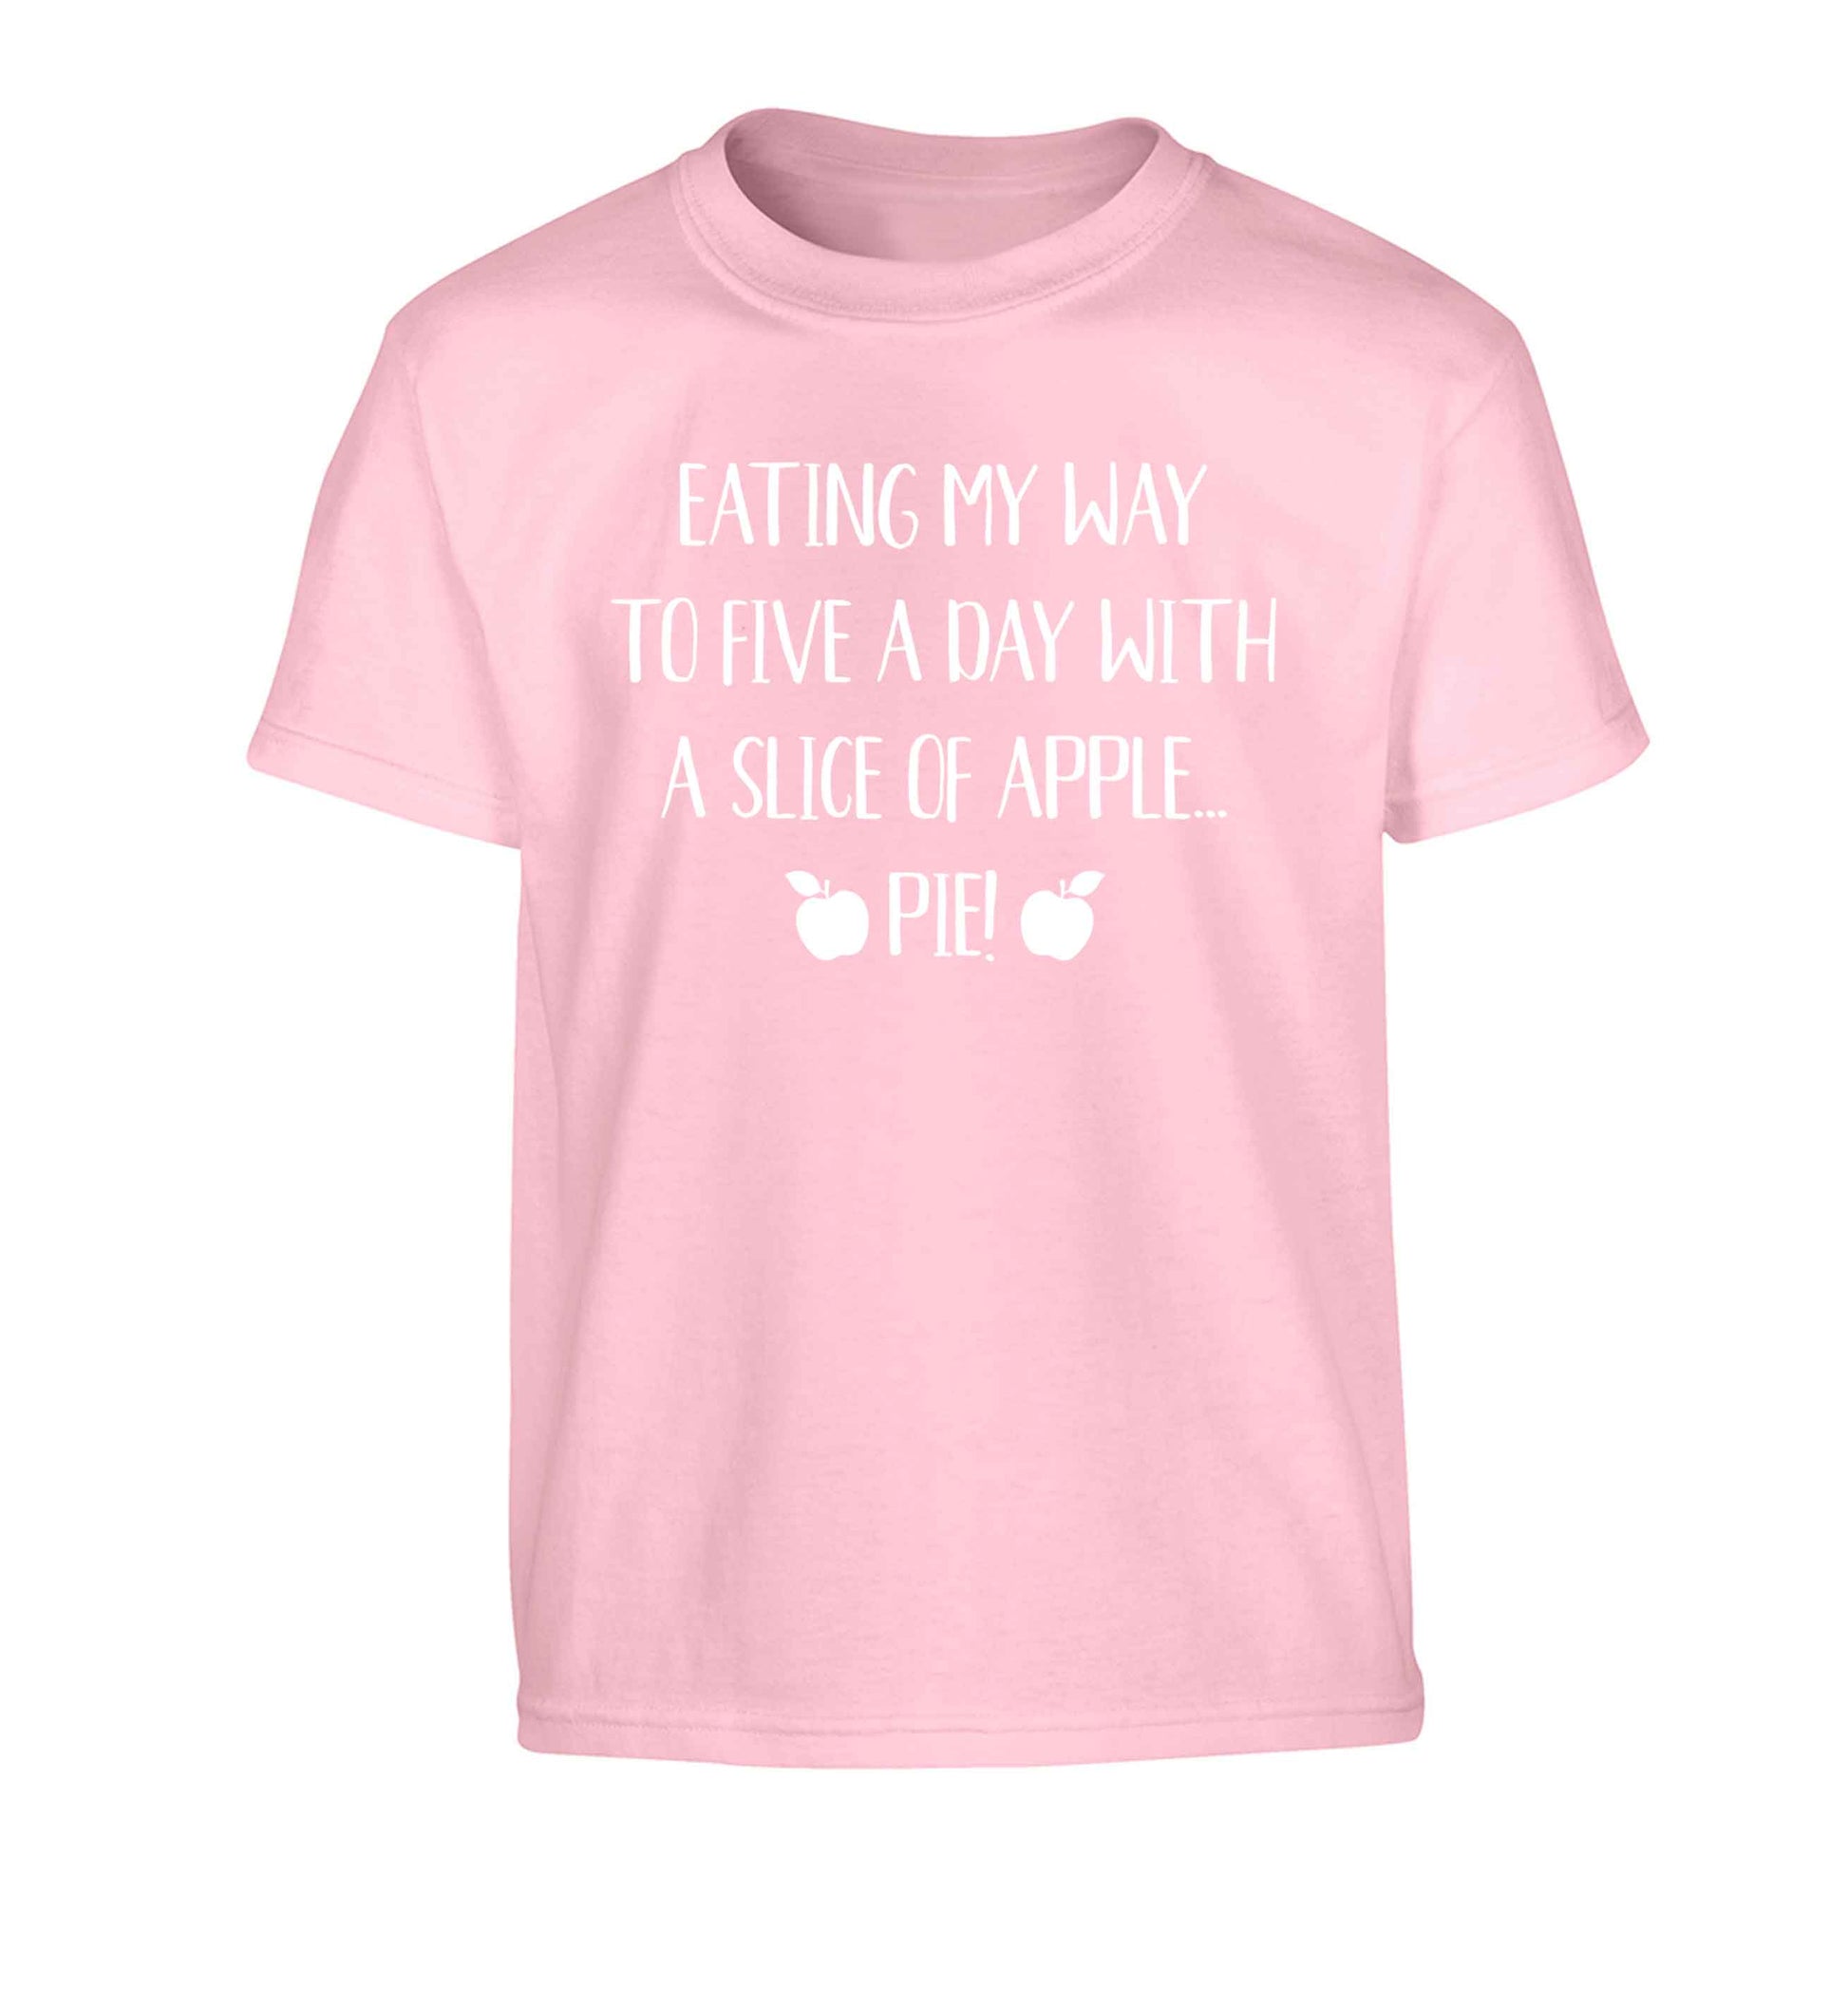 Eating my way to five a day with a slice of apple pie Children's light pink Tshirt 12-13 Years